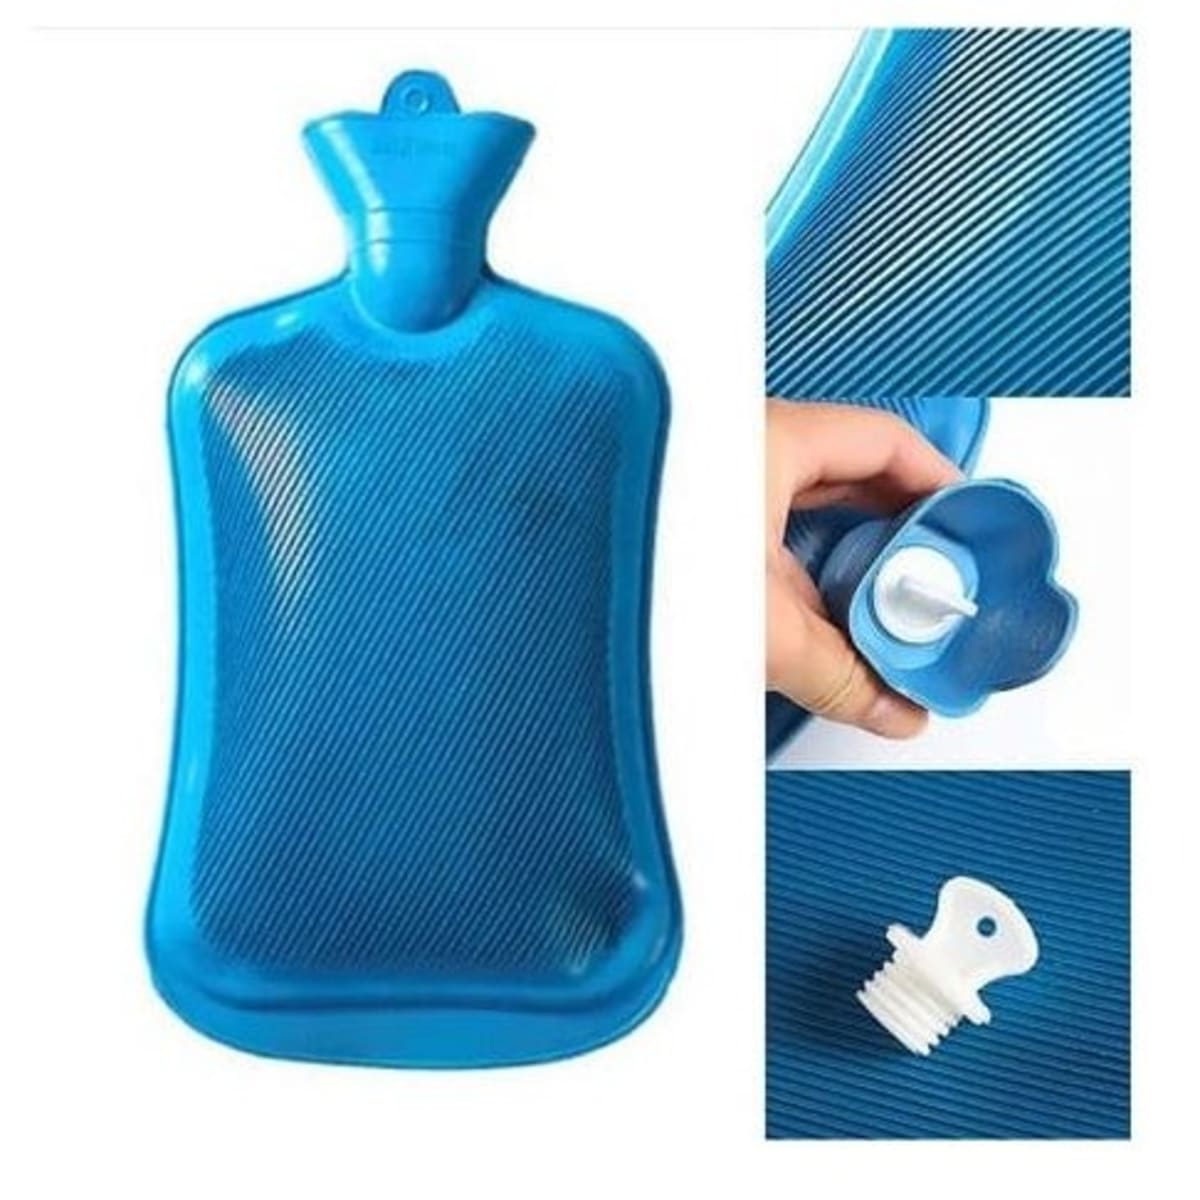 Nea Rubber Warm Bag for Pain Relief & Massager Non Electrical 2 L Hot Water  Bag Price in India - Buy Nea Rubber Warm Bag for Pain Relief & Massager Non  Electrical